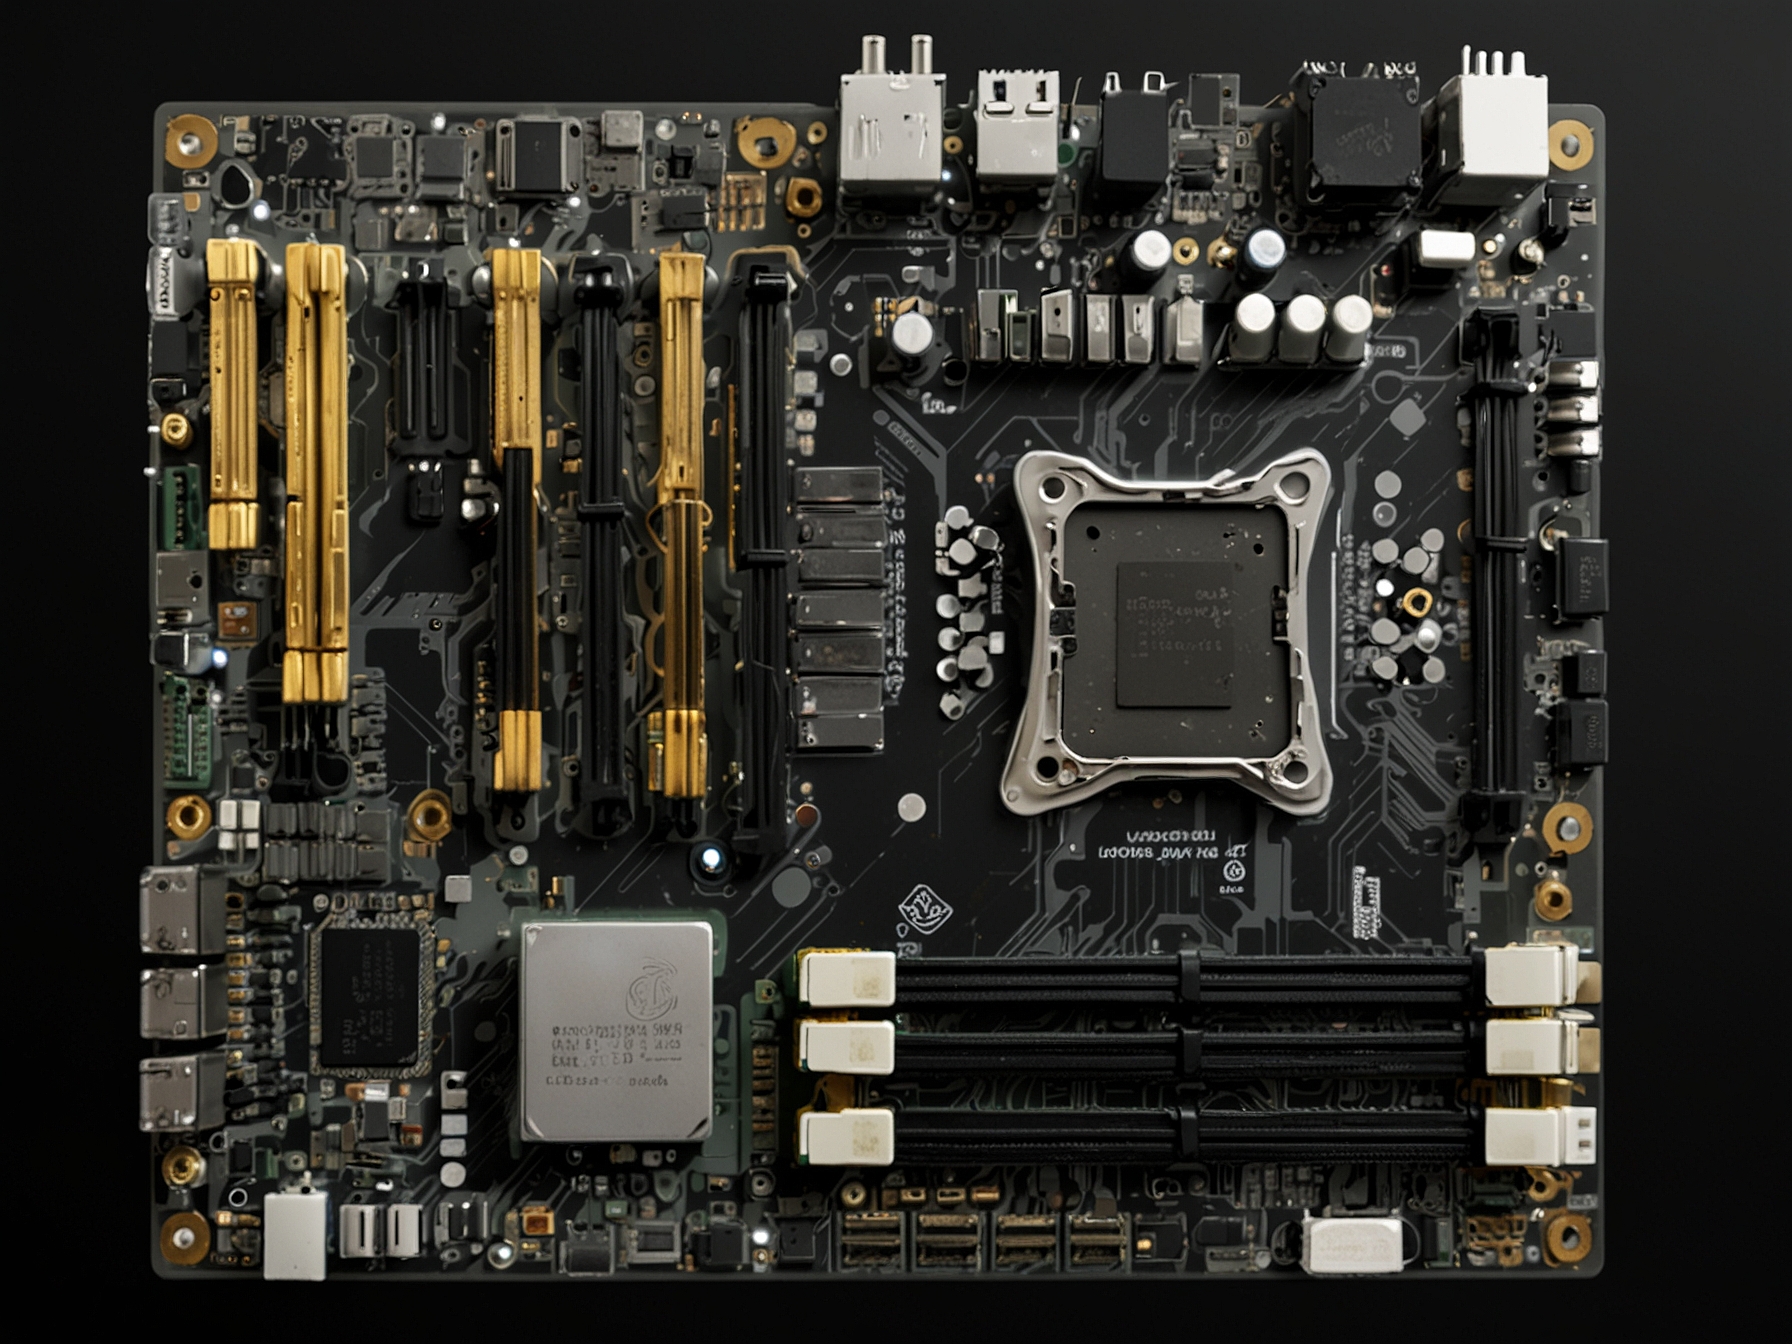 A detailed motherboard layout showcasing the Loongson 3A6000 processor, with prominent labels on DDR4 memory slots, PCIe 3.0 interface, and secure boot capabilities.